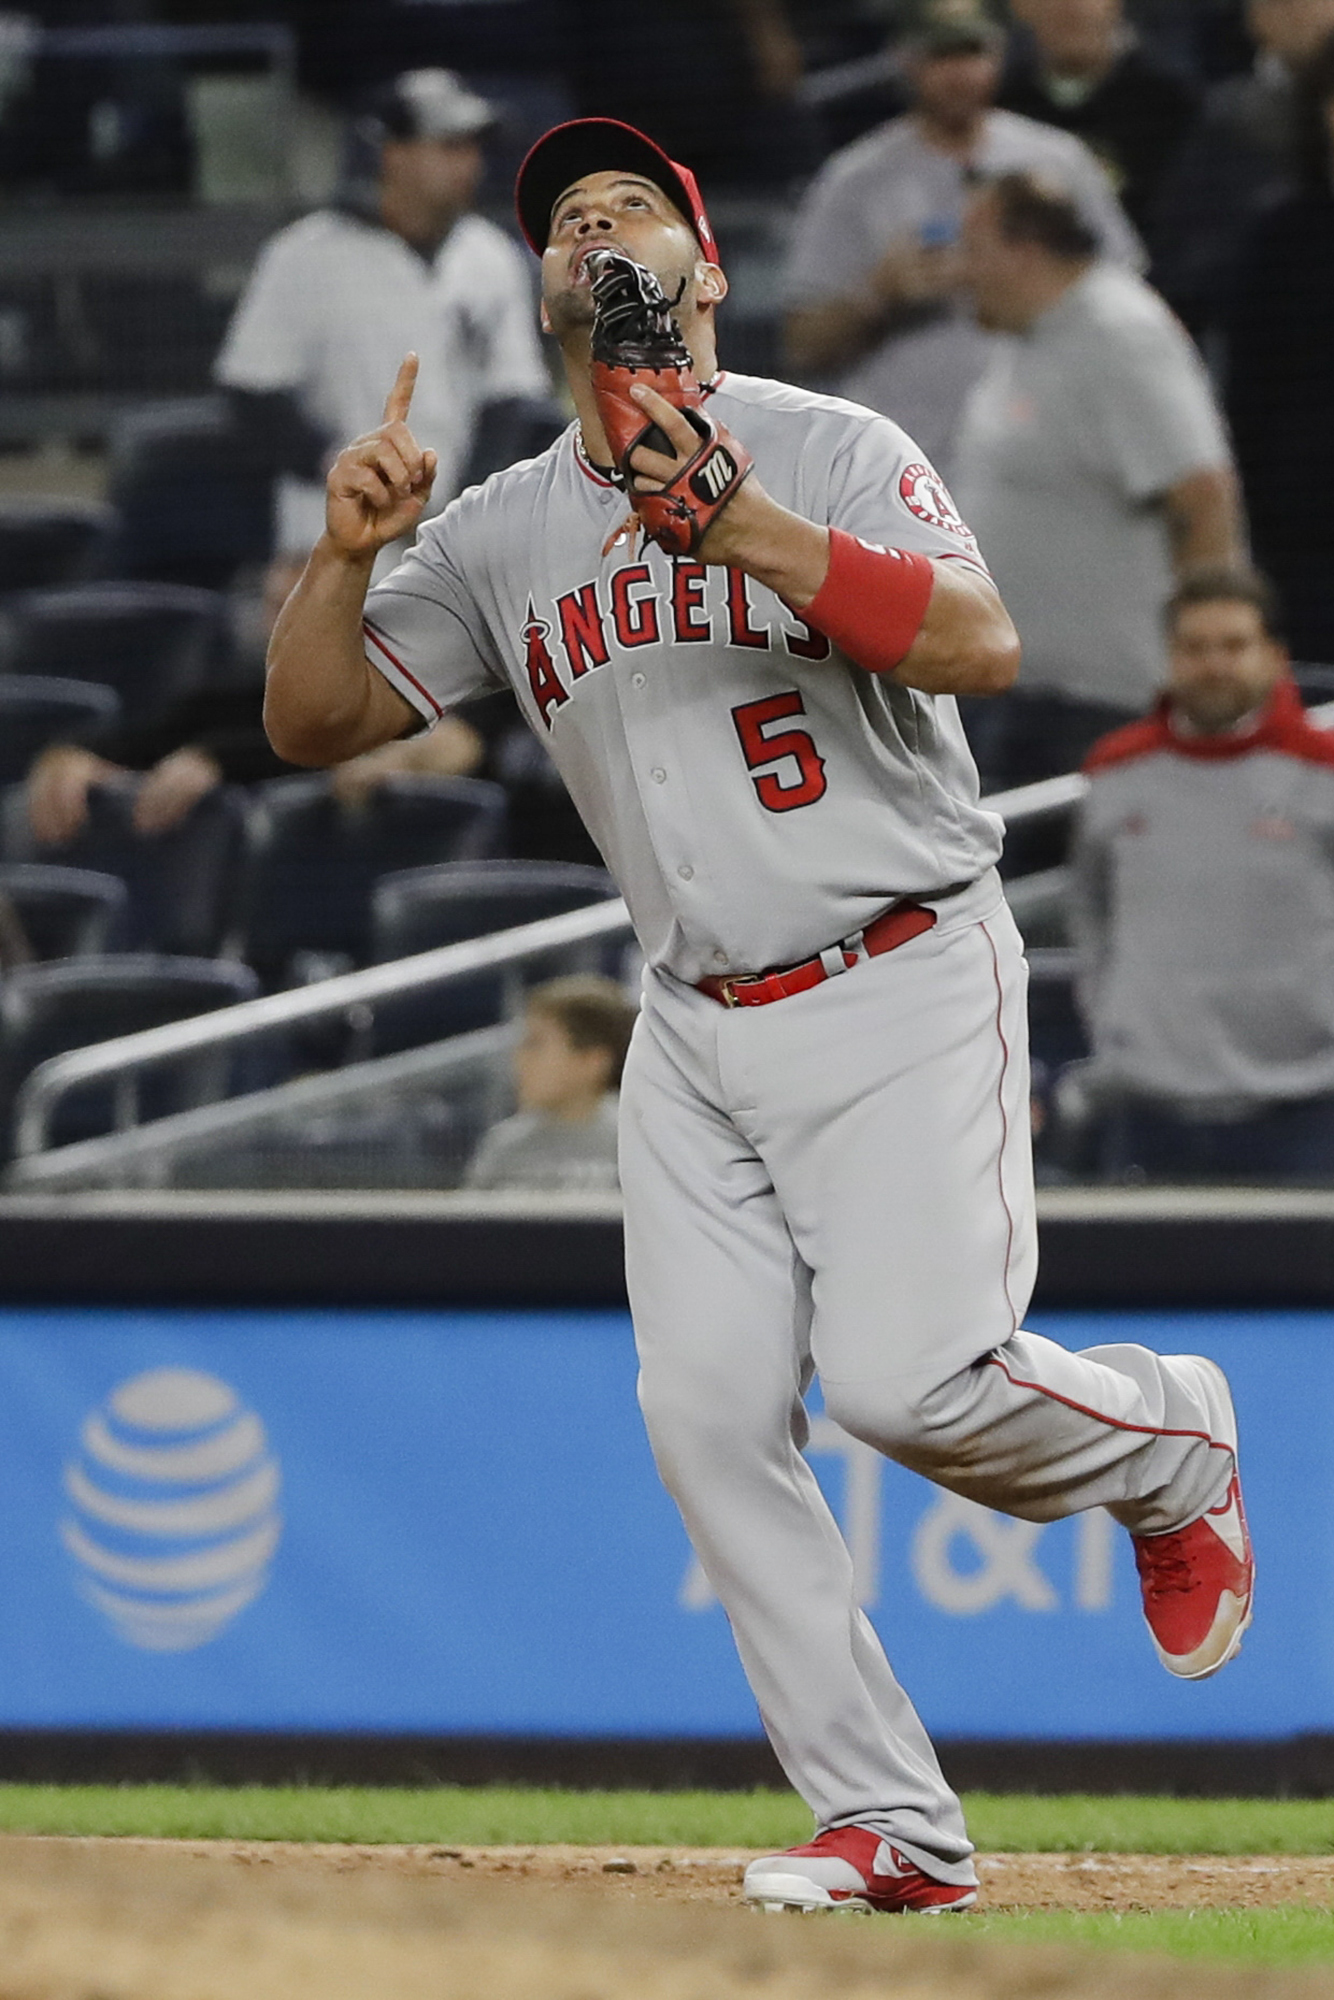 Yankees lose to Angels 3-2, miss chance to clinch AL East